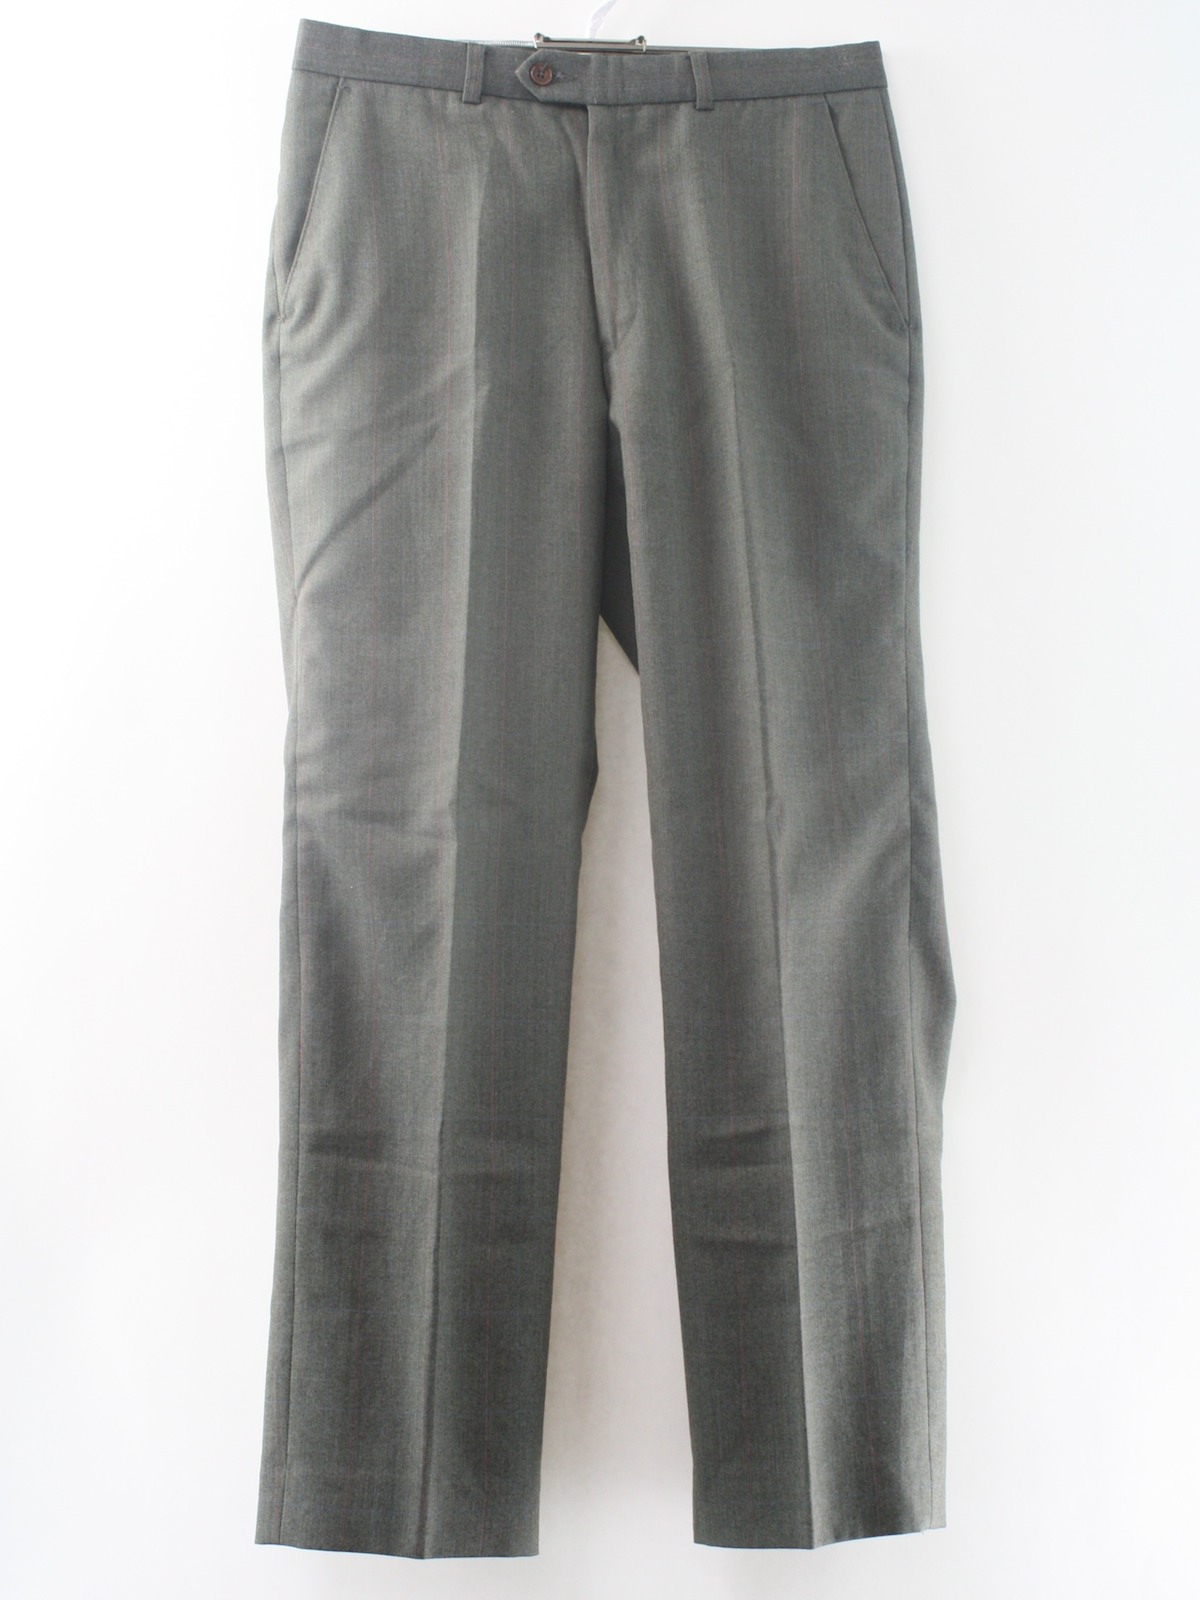 Retro 80s Pants (St Michael) : Early 80s -St Michael- Mens grey, red ...